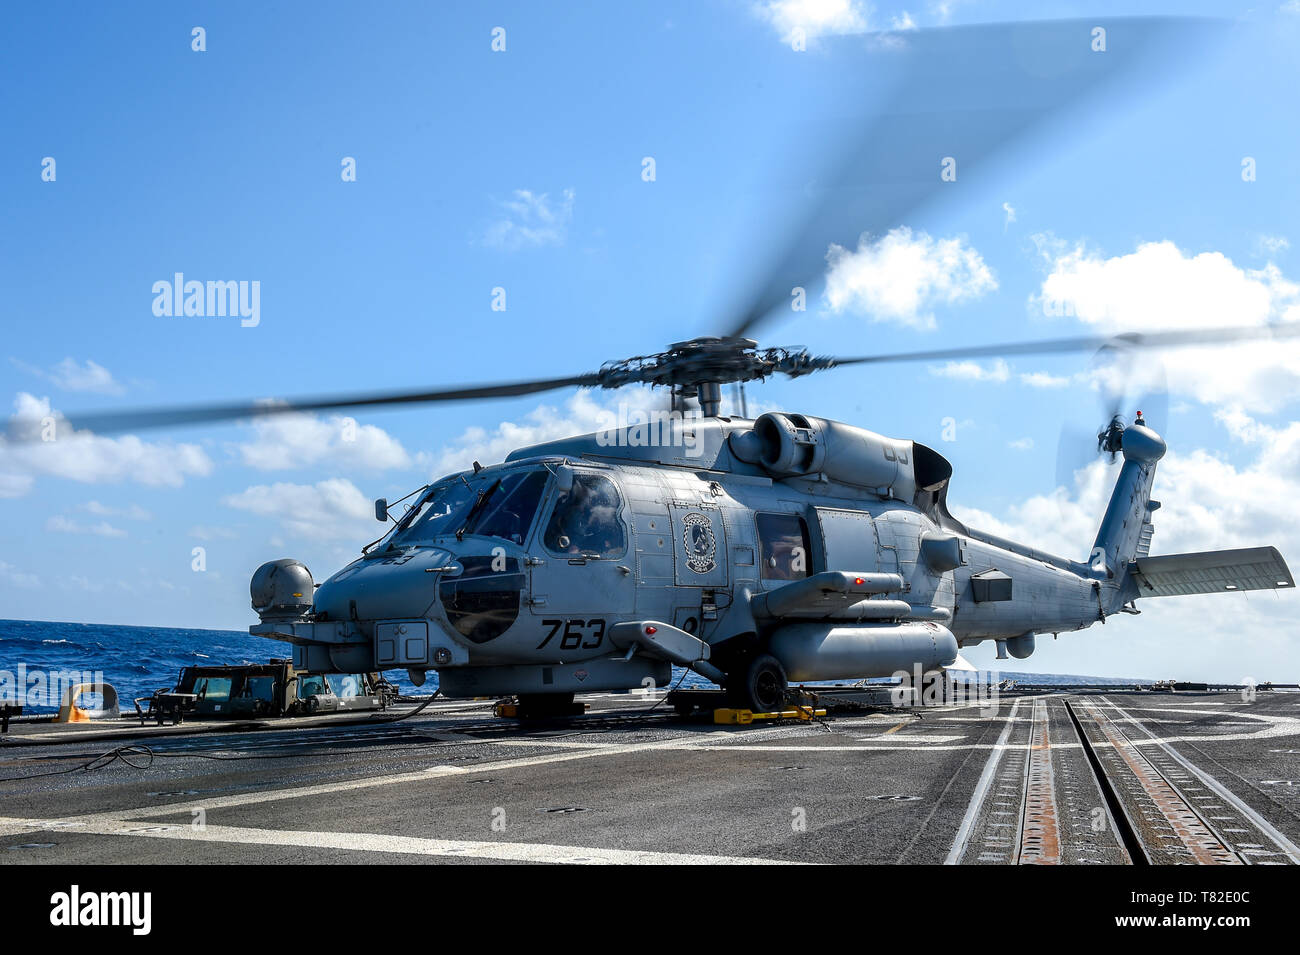 190410-N-UM706-0040 ATLANTIC OCEAN (April 10, 2019) An MH-60R Sea Hawk Helicopter, assigned to the “Grandmasters” of Helicopter Maritime Strike Squadron (HSM) 46, prepares to take off of the flight deck aboard the Arleigh Burke-class guided-missile destroyer USS Nitze (DDG 94). Nitze is underway as part of Abraham Lincoln Carrier Strike Group (ABECSG) deployment in support of maritime security cooperation efforts in the U.S. 5th, 6th and 7th Fleet areas of responsibility. With Abraham Lincoln as the flagship, deployed strike group assets include staffs, ships and aircraft of Carrier Strike Gro Stock Photo